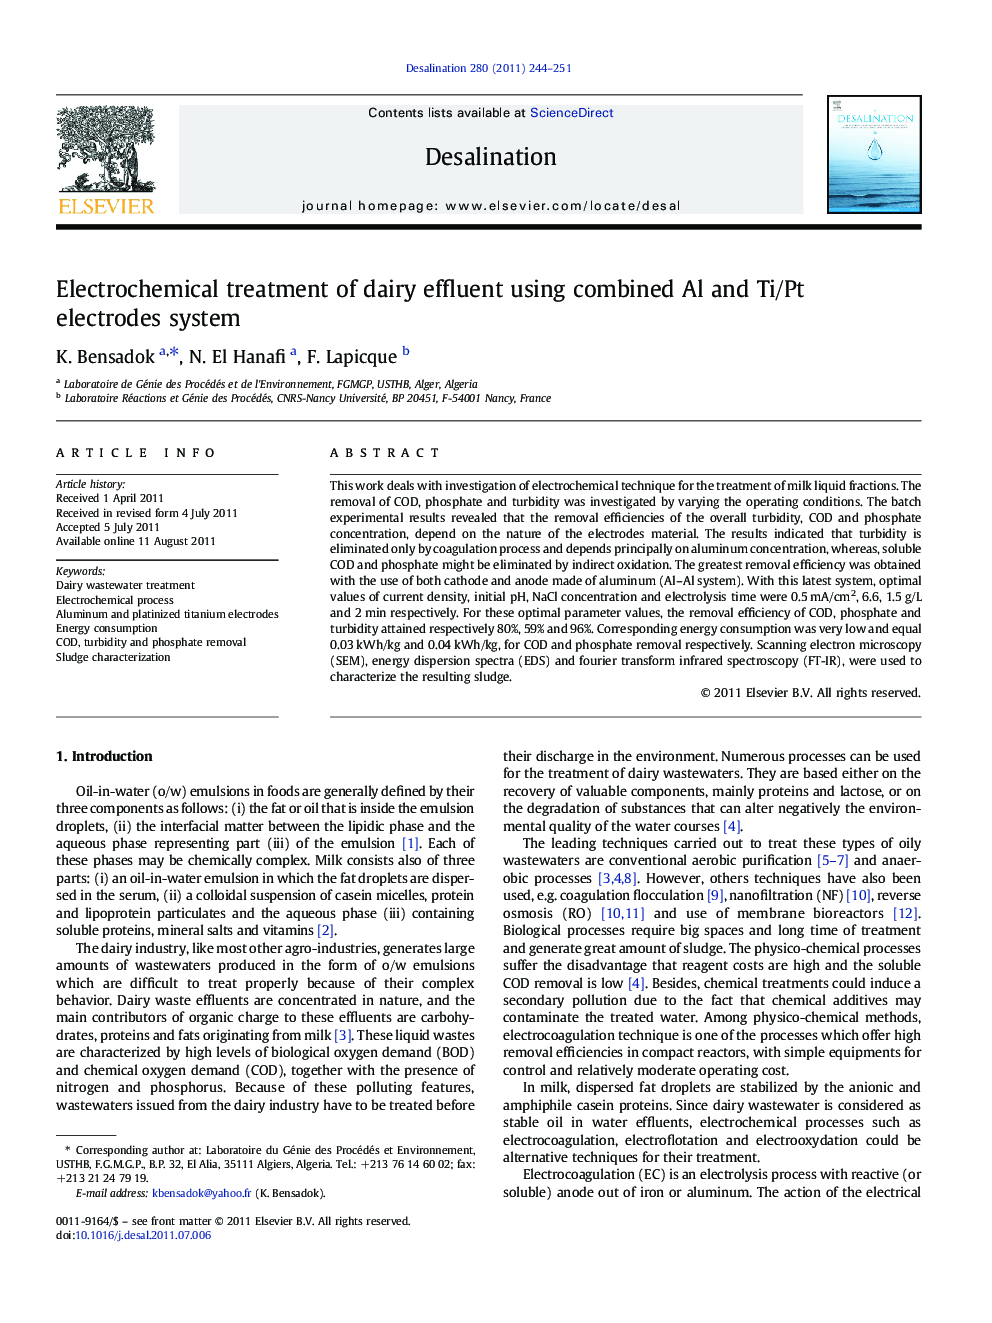 Electrochemical treatment of dairy effluent using combined Al and Ti/Pt electrodes system